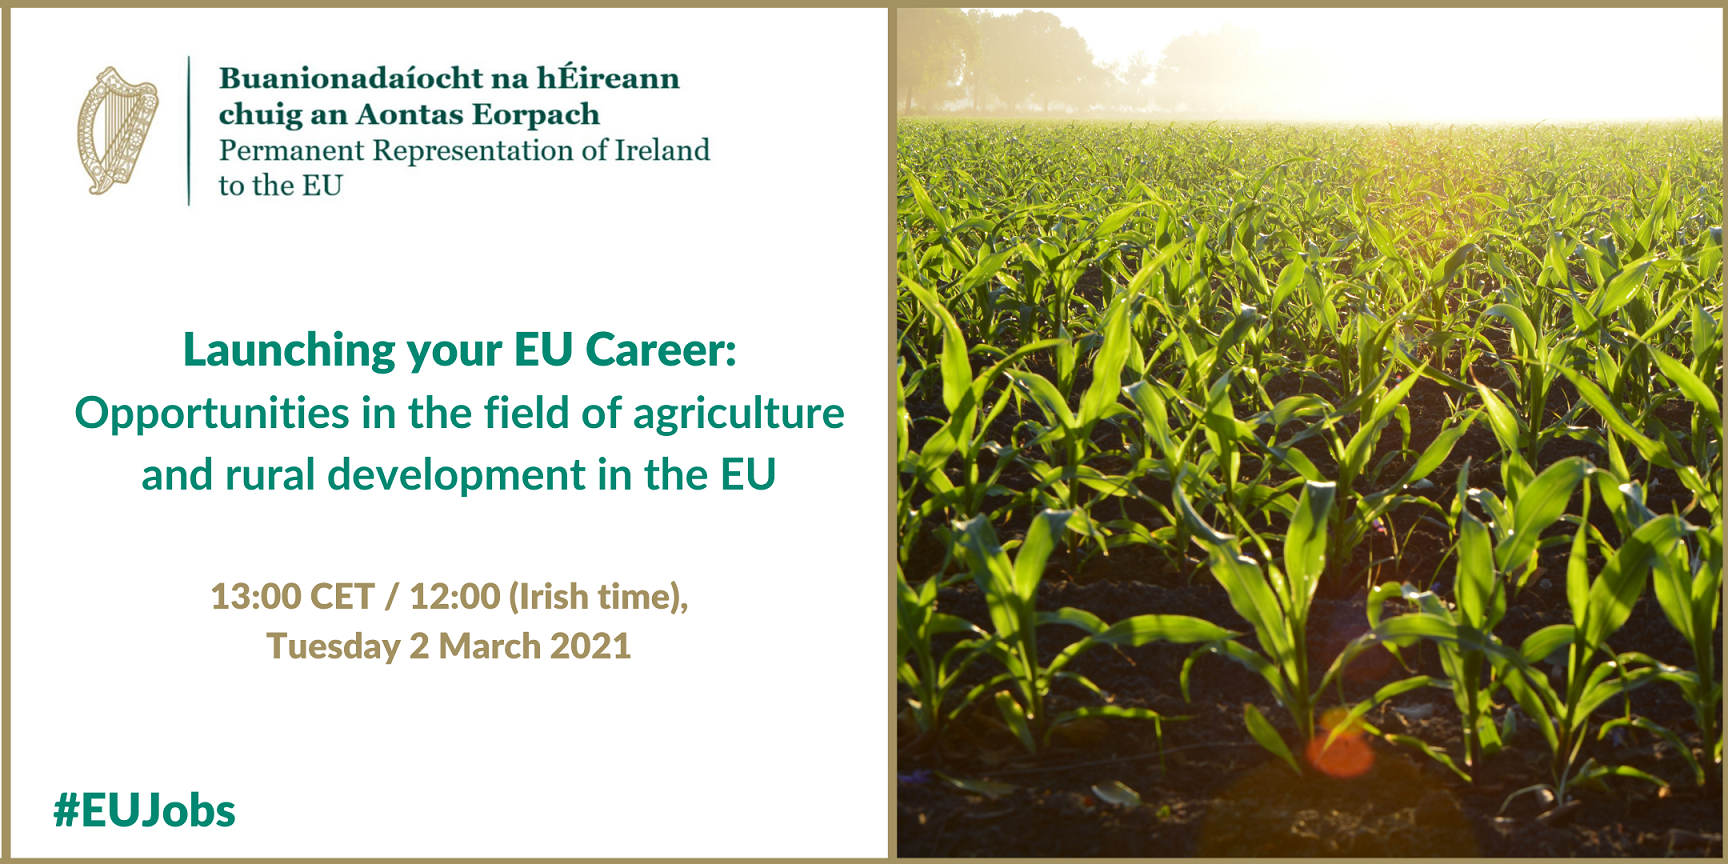 Launching your EU Career: Opportunities in the field of agriculture and rural development in the EU